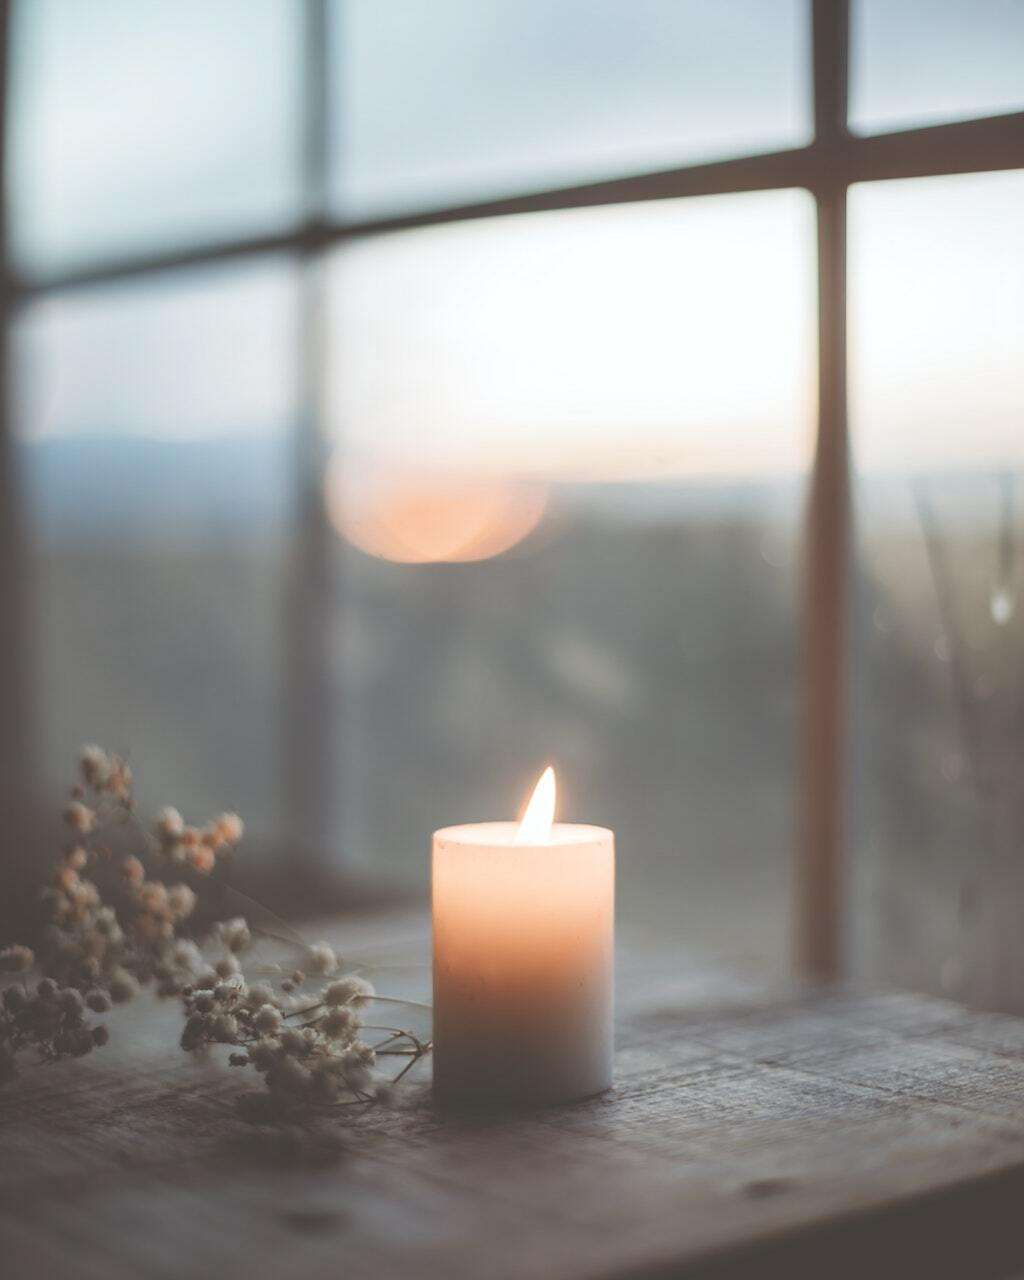 candle by window